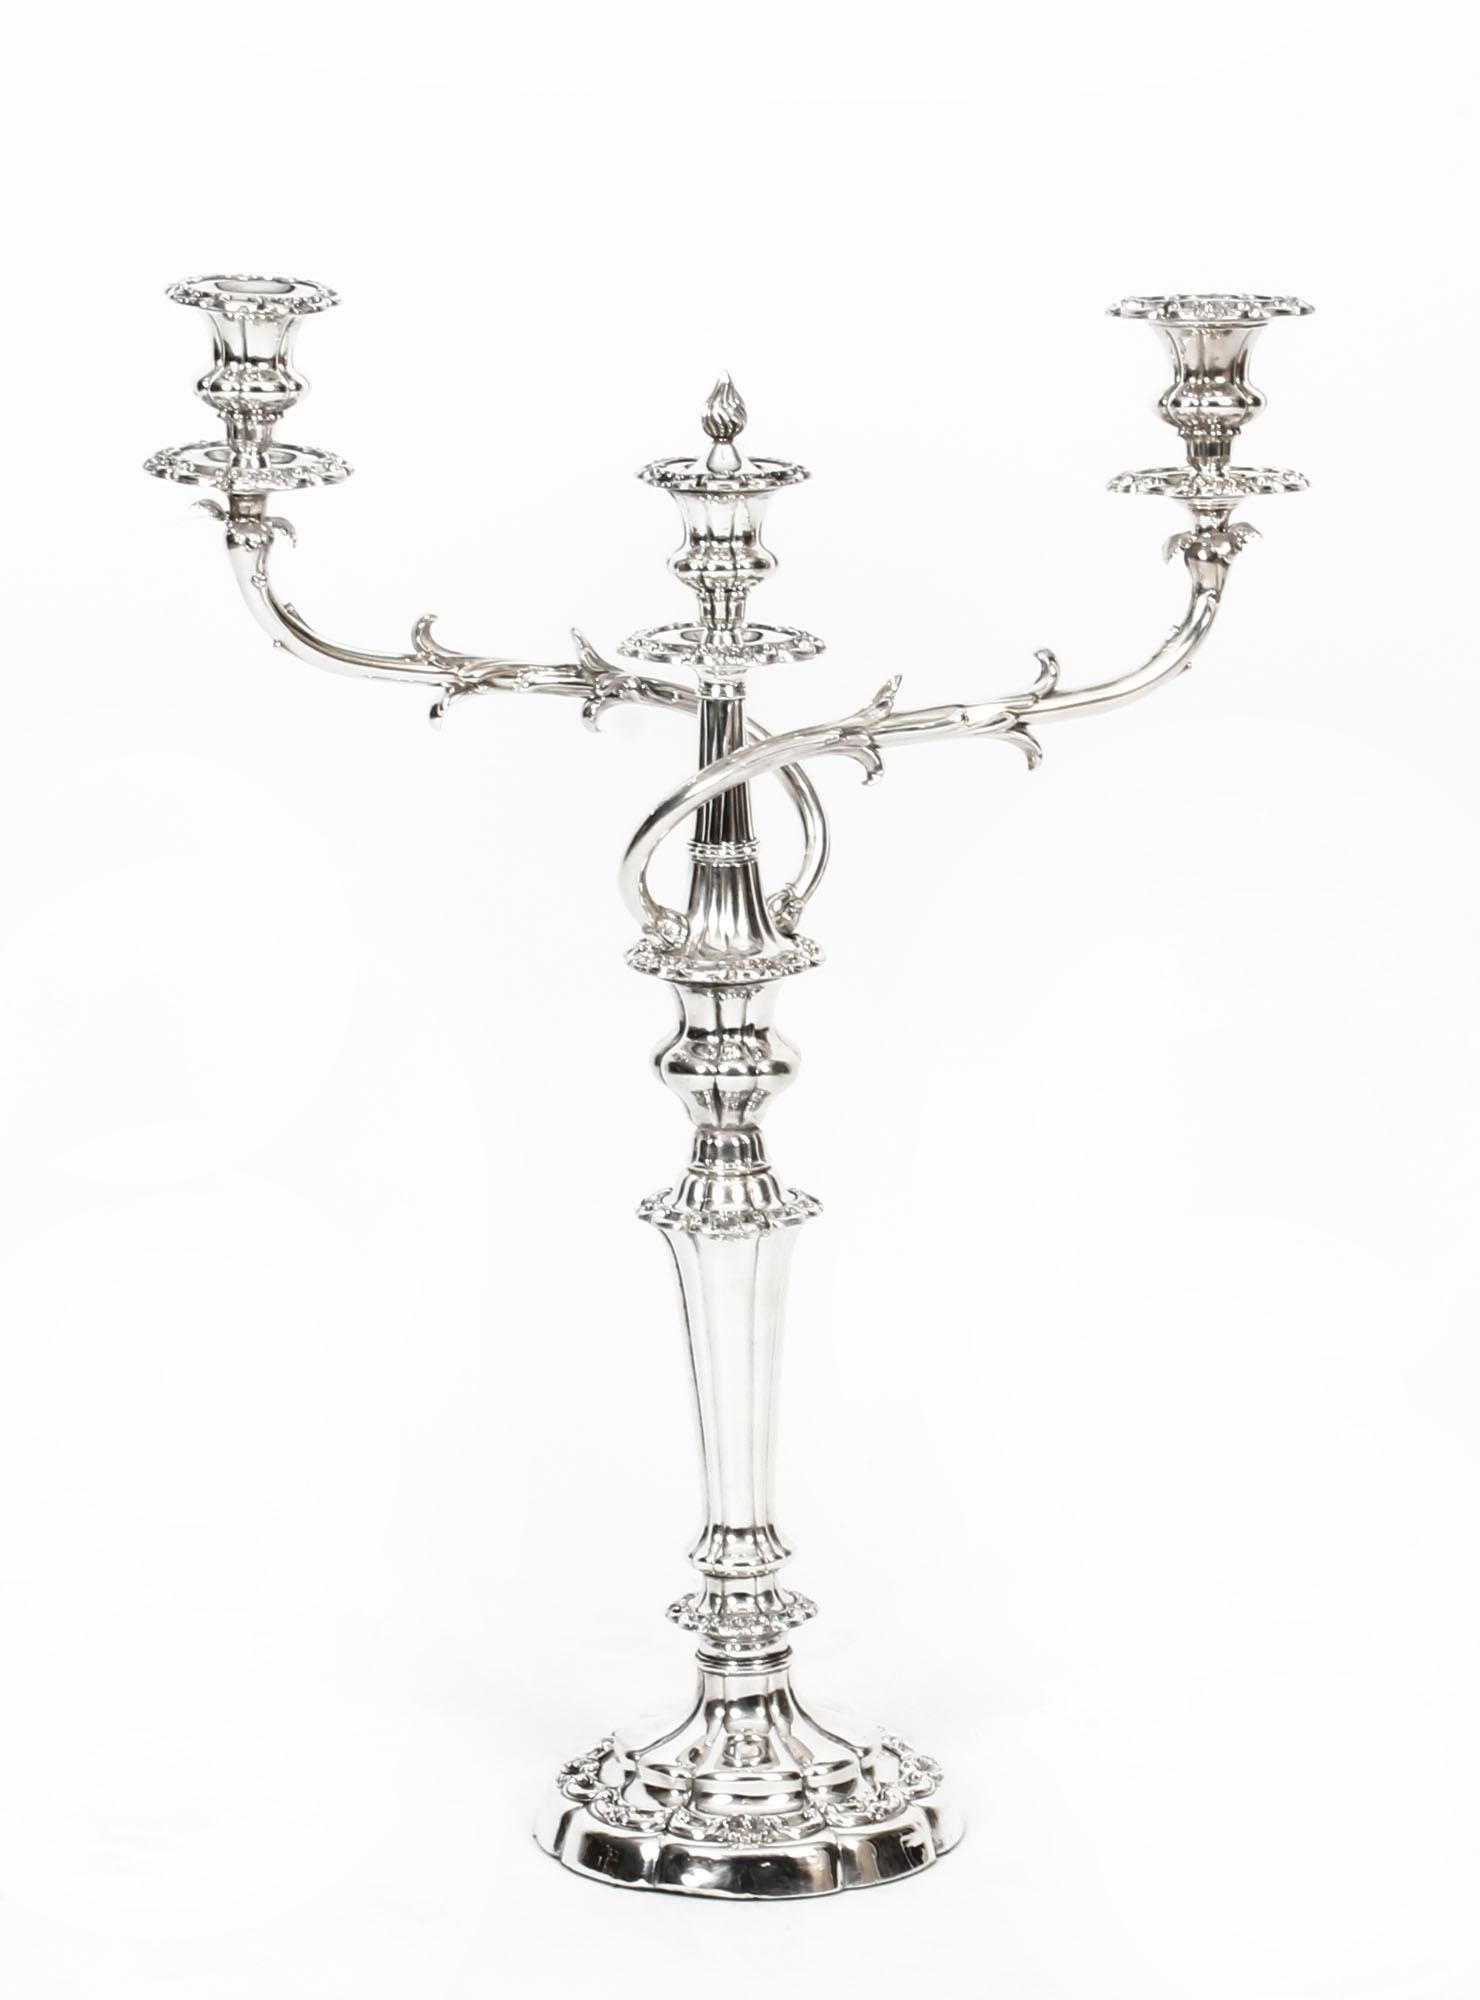 This is an important elegant large pair of antique English George III Old Sheffield silver plate, three light, two-branch table candelabra from the Rothschild Collection, circa 1820 in date.
 
The candelabra feature tapering lobed circular columns